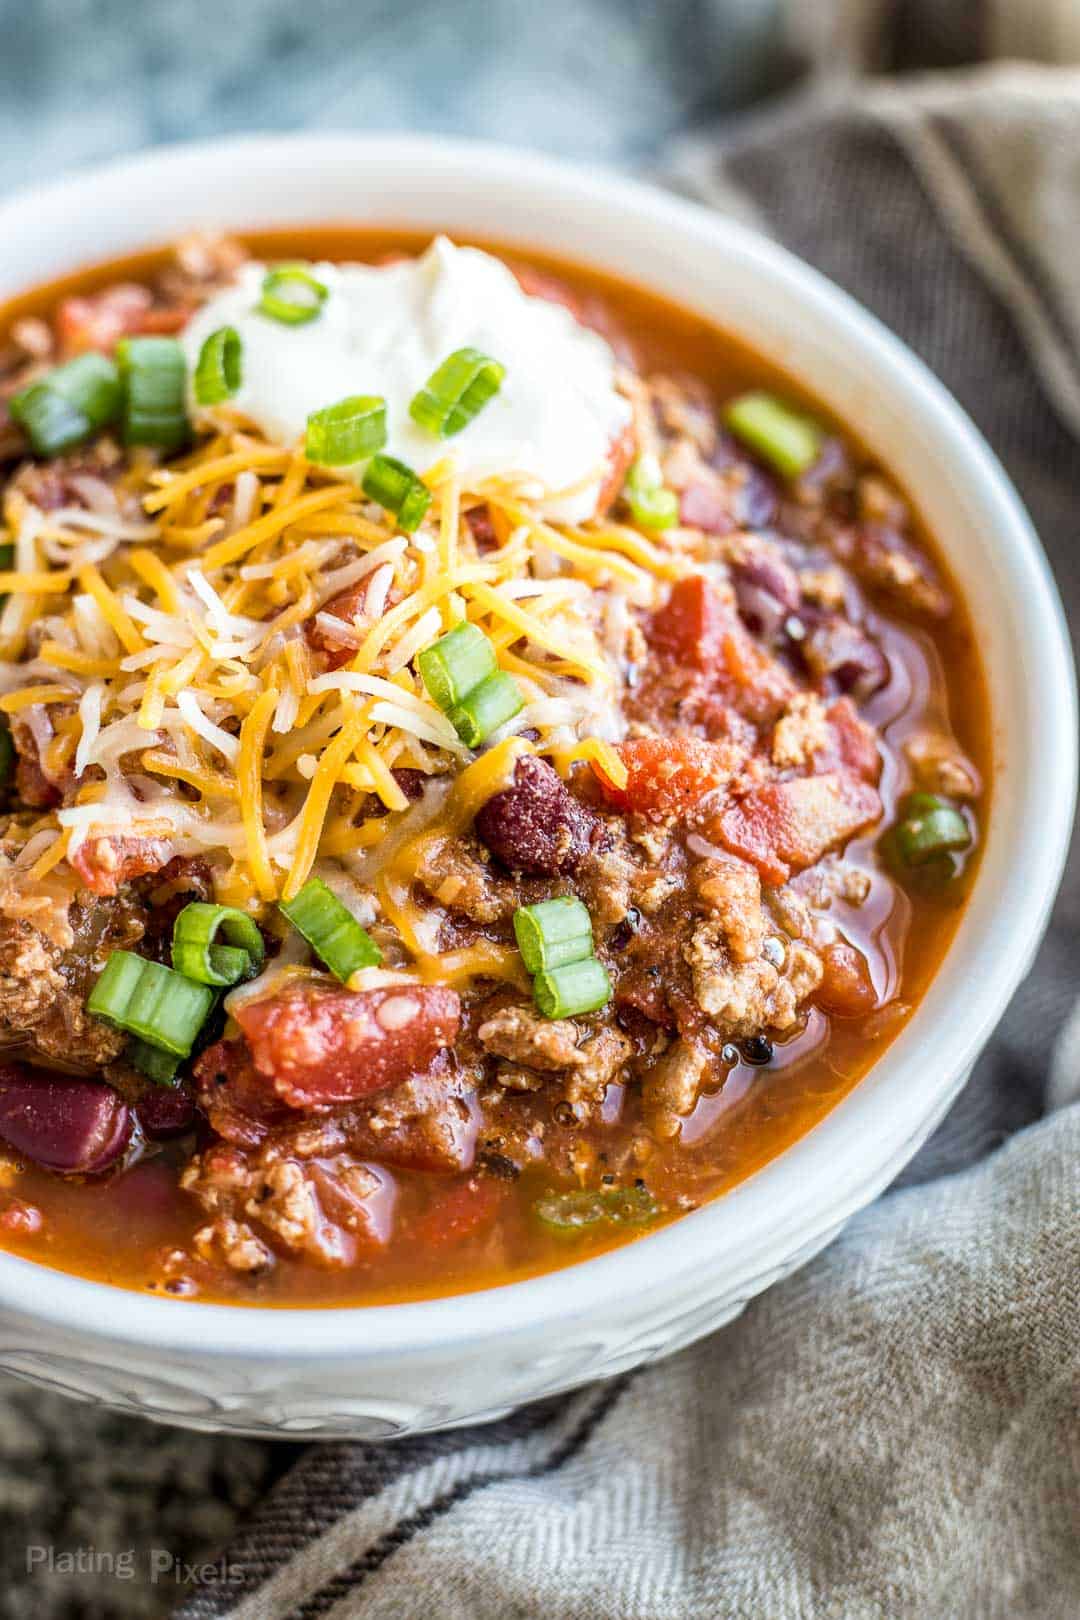 Healthy Turkey Chili in a bowl garnished with green onions, cheese and sour cream